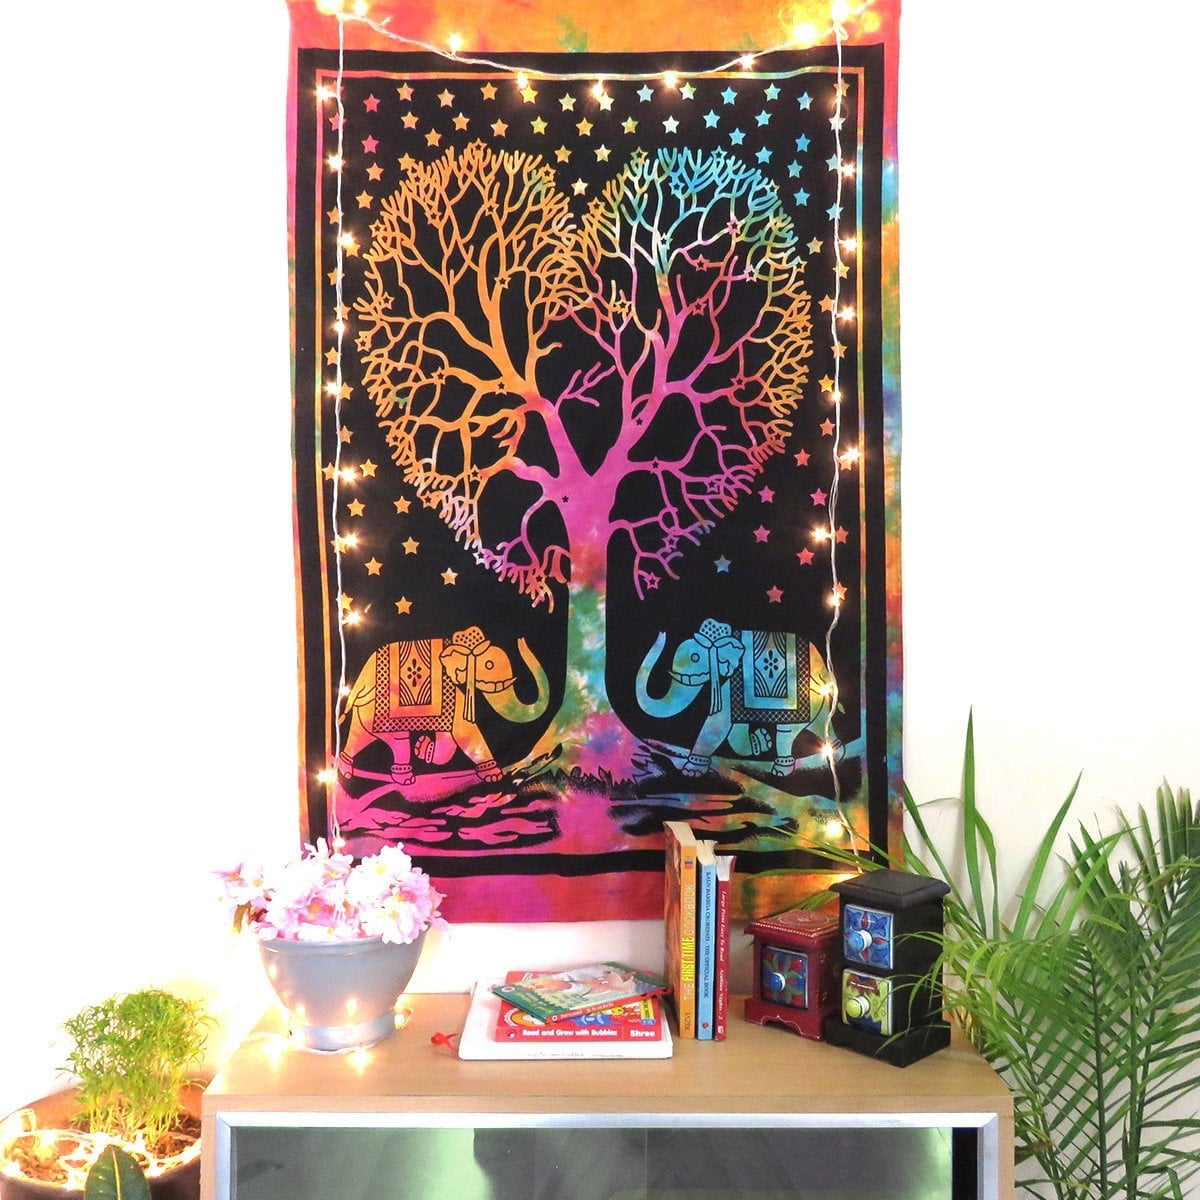 Indian Wall Tree Of Life Poster Hanging Tapestry Decor Cotton Hippie Bohemian 